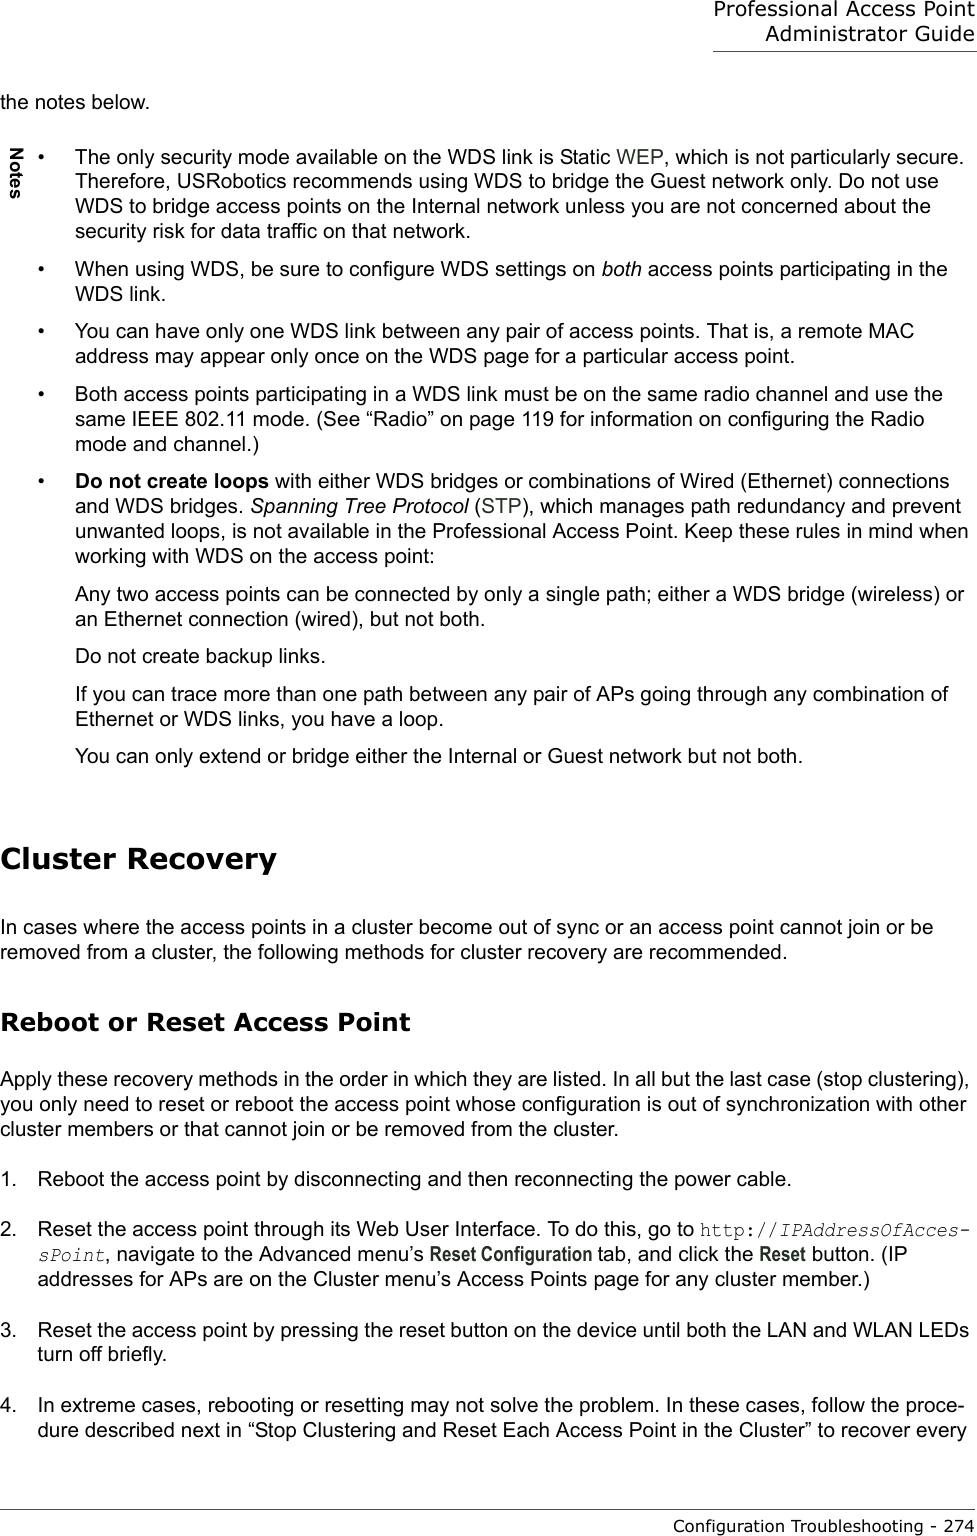 Professional Access Point Administrator GuideConfiguration Troubleshooting - 274the notes below.Cluster RecoveryIn cases where the access points in a cluster become out of sync or an access point cannot join or be removed from a cluster, the following methods for cluster recovery are recommended.Reboot or Reset Access PointApply these recovery methods in the order in which they are listed. In all but the last case (stop clustering), you only need to reset or reboot the access point whose configuration is out of synchronization with other cluster members or that cannot join or be removed from the cluster.1. Reboot the access point by disconnecting and then reconnecting the power cable.2. Reset the access point through its Web User Interface. To do this, go to http://IPAddressOfAcces-sPoint, navigate to the Advanced menu’s Reset Configuration tab, and click the Reset button. (IP addresses for APs are on the Cluster menu’s Access Points page for any cluster member.)3. Reset the access point by pressing the reset button on the device until both the LAN and WLAN LEDs turn off briefly.4. In extreme cases, rebooting or resetting may not solve the problem. In these cases, follow the proce-dure described next in “Stop Clustering and Reset Each Access Point in the Cluster” to recover every Notes• The only security mode available on the WDS link is Static WEP, which is not particularly secure. Therefore, USRobotics recommends using WDS to bridge the Guest network only. Do not use WDS to bridge access points on the Internal network unless you are not concerned about the security risk for data traffic on that network.• When using WDS, be sure to configure WDS settings on both access points participating in the WDS link.• You can have only one WDS link between any pair of access points. That is, a remote MAC address may appear only once on the WDS page for a particular access point.• Both access points participating in a WDS link must be on the same radio channel and use the same IEEE 802.11 mode. (See “Radio” on page 119 for information on configuring the Radio mode and channel.)•Do not create loops with either WDS bridges or combinations of Wired (Ethernet) connections and WDS bridges. Spanning Tree Protocol (STP), which manages path redundancy and prevent unwanted loops, is not available in the Professional Access Point. Keep these rules in mind when working with WDS on the access point:Any two access points can be connected by only a single path; either a WDS bridge (wireless) or an Ethernet connection (wired), but not both.Do not create backup links.If you can trace more than one path between any pair of APs going through any combination of Ethernet or WDS links, you have a loop.You can only extend or bridge either the Internal or Guest network but not both.